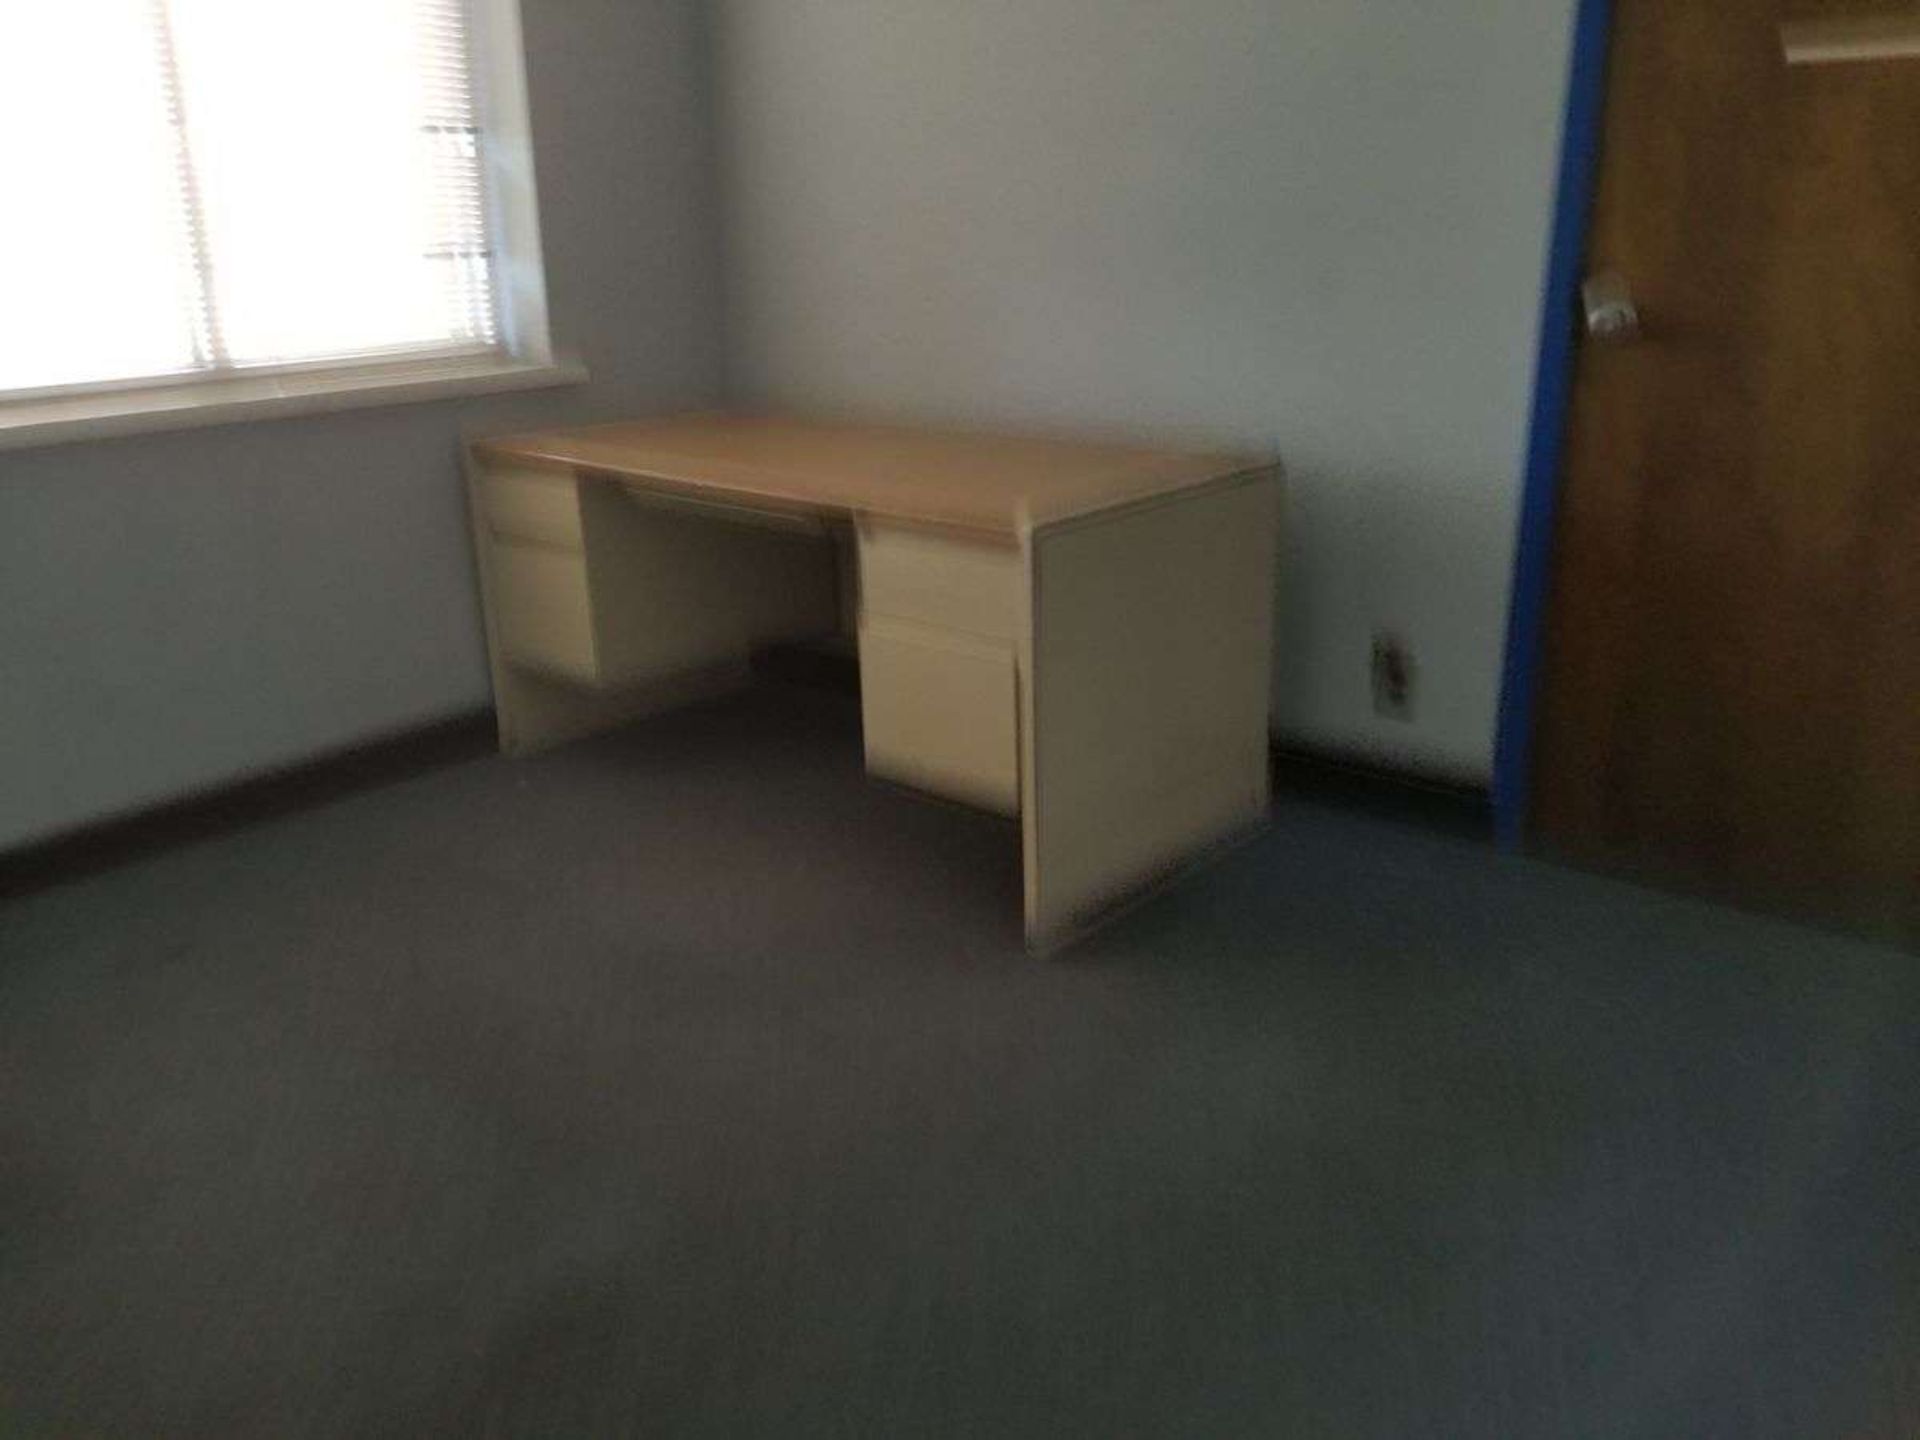 Office Furniture - Image 18 of 18